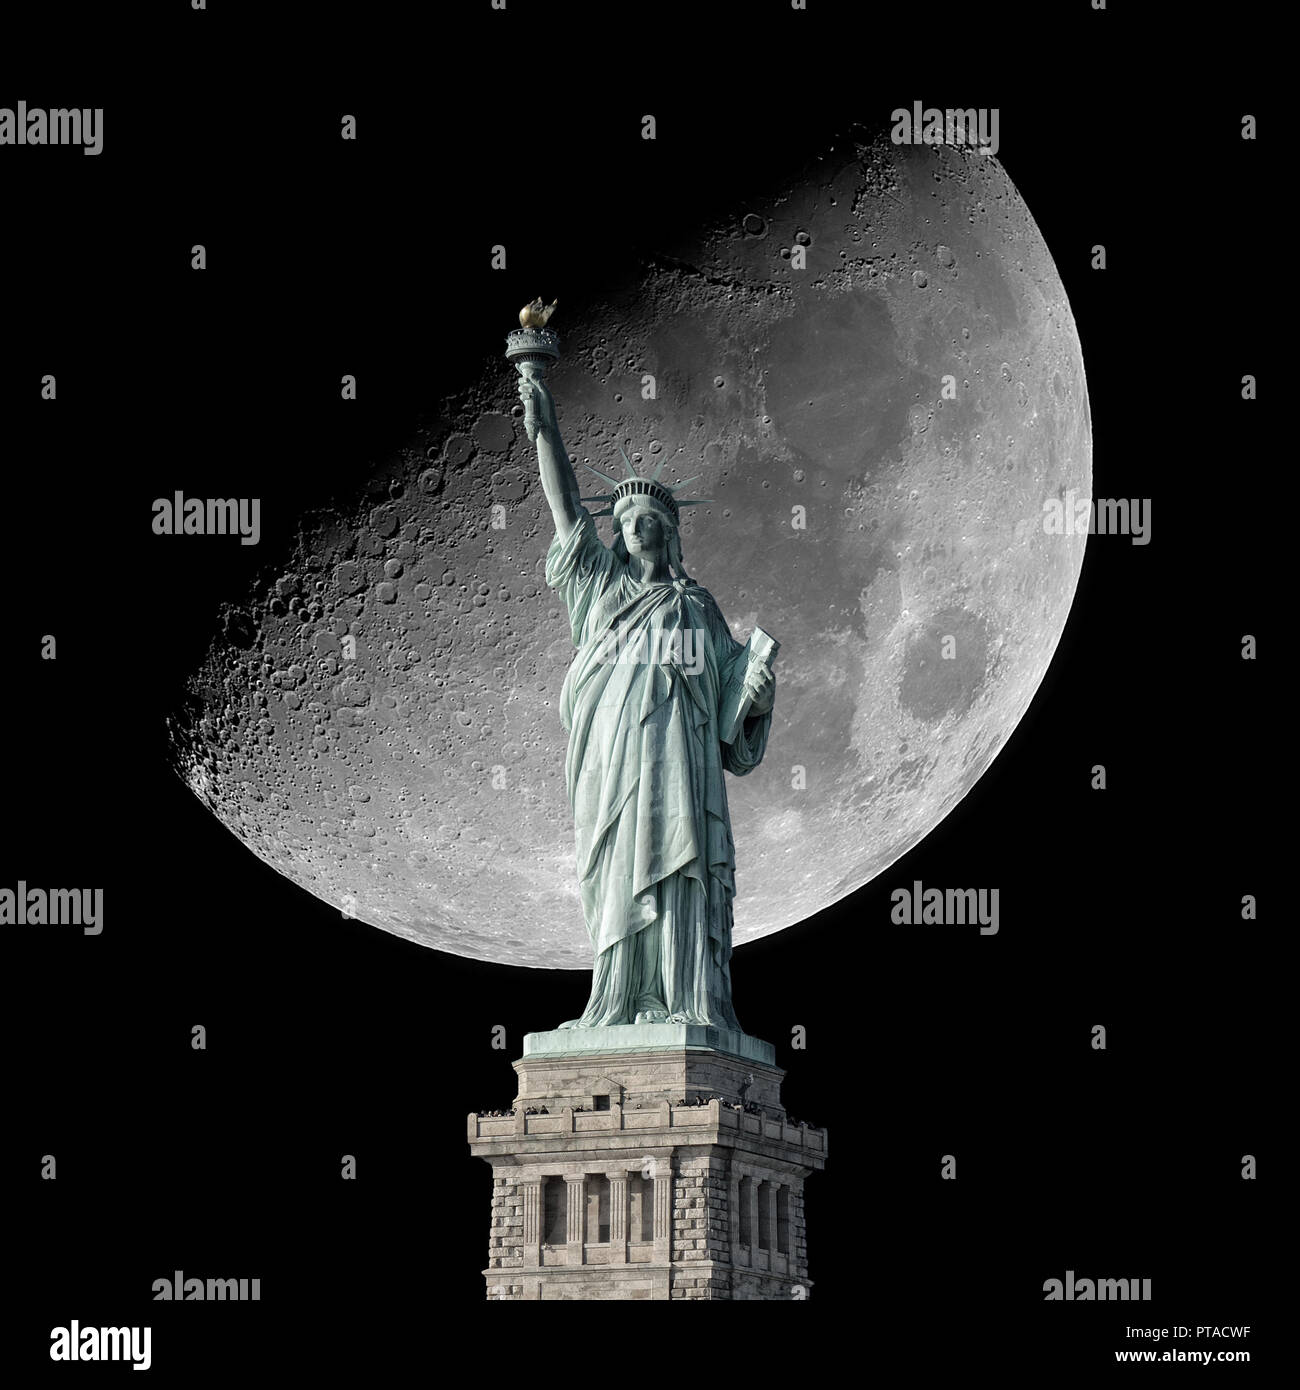 Statue of Liberty and Moon on the black night sky. Stock Photo